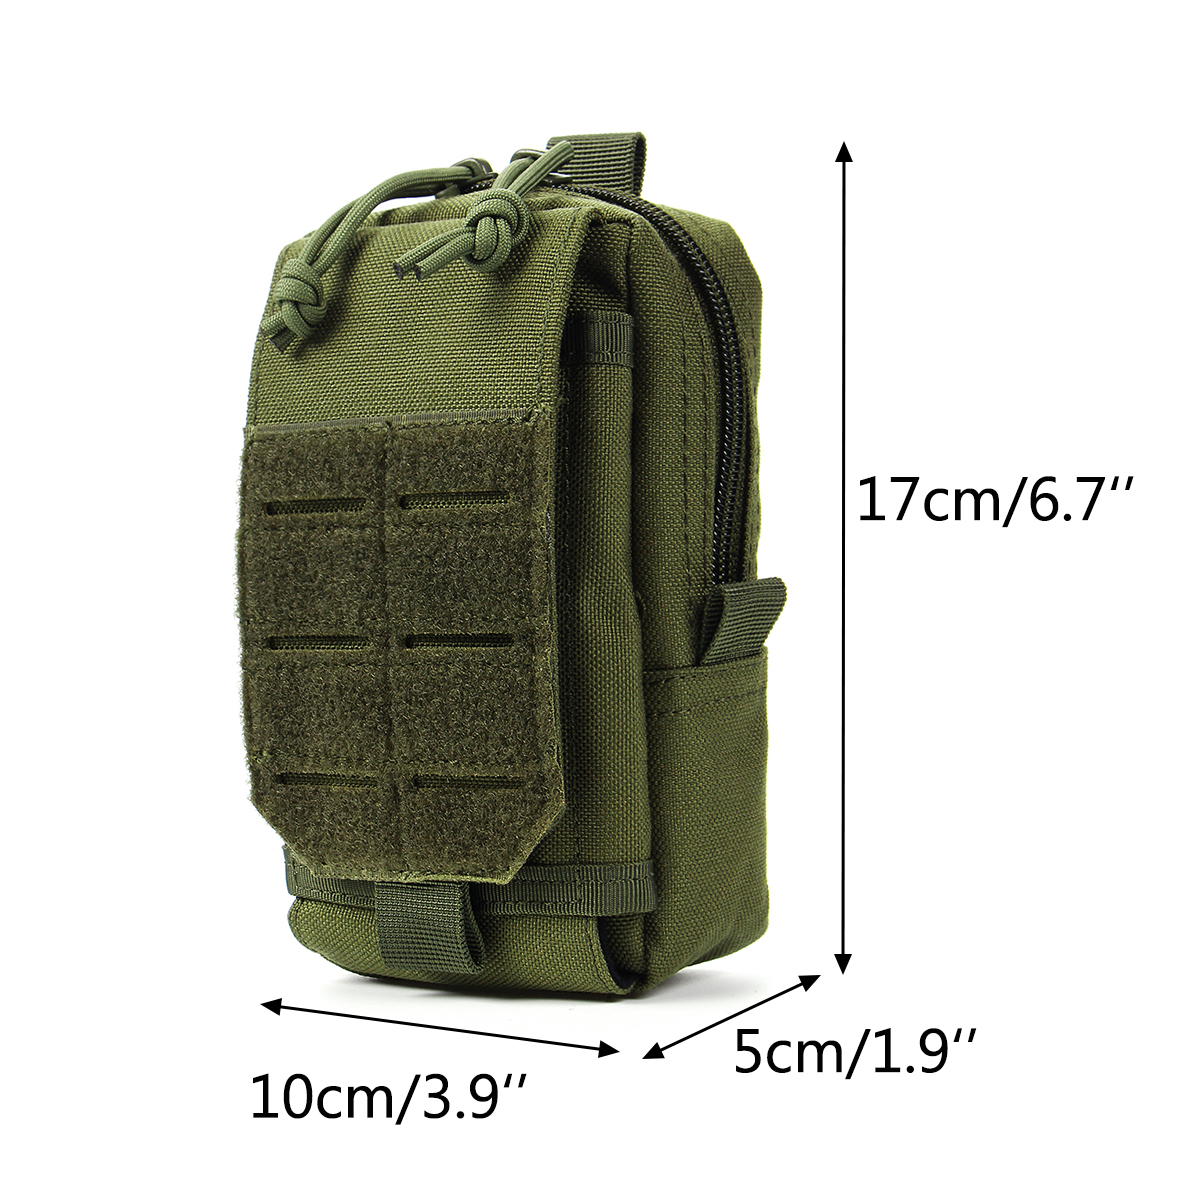 Tactical Molle Pouch Belt Waist Bag Military Fanny Pack Phone Pocket Wallet Hike 